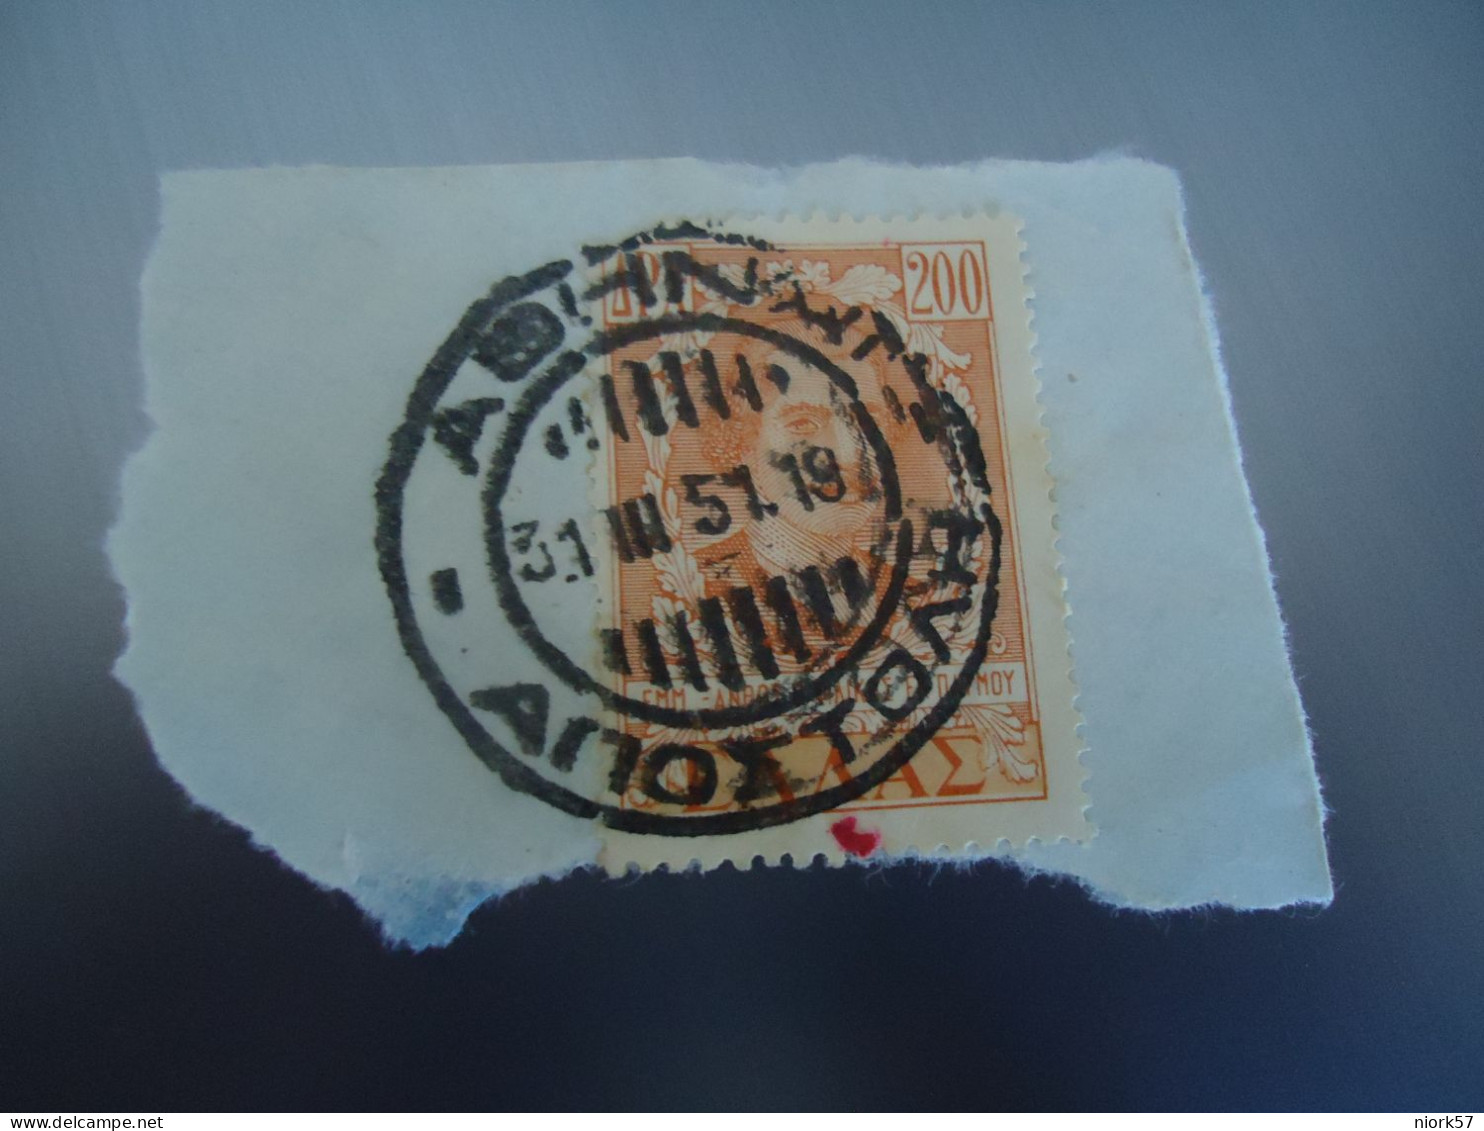 GREECE   STAMPS  WITH POSTMARK   ΑΘΗΝAI  19   ΑΠΟΣΤΟΛΗ - Poststempel - Freistempel